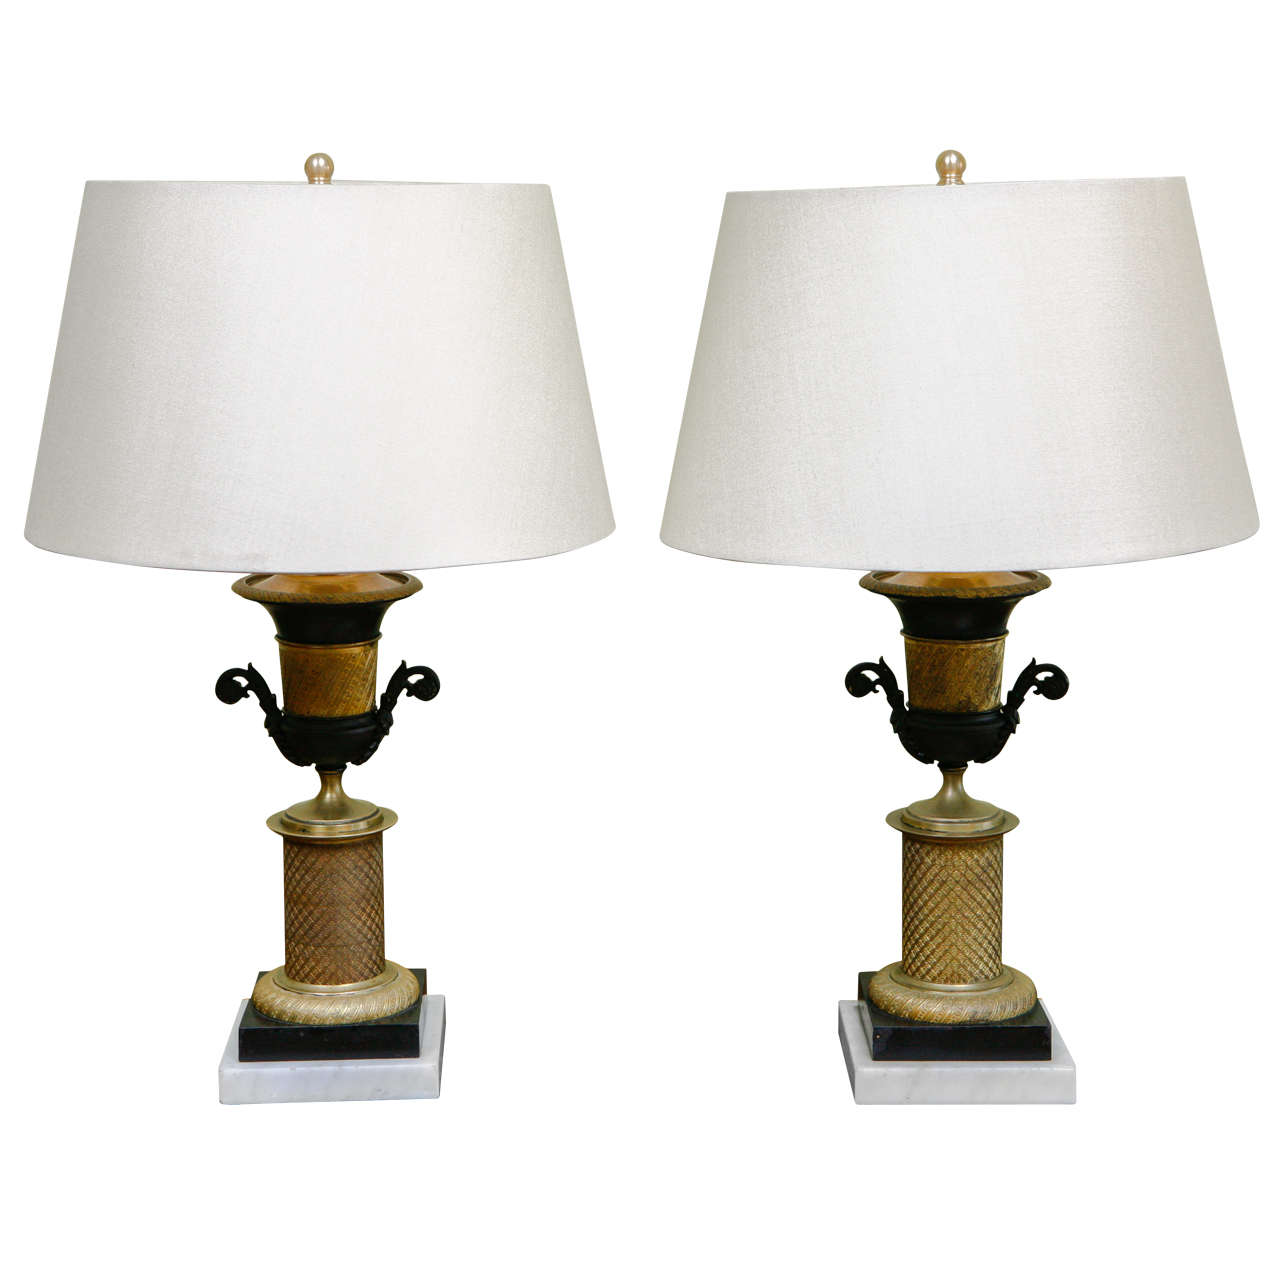 A Pair of Second Empire Urns, c. 1860, Mounted as Lamps.